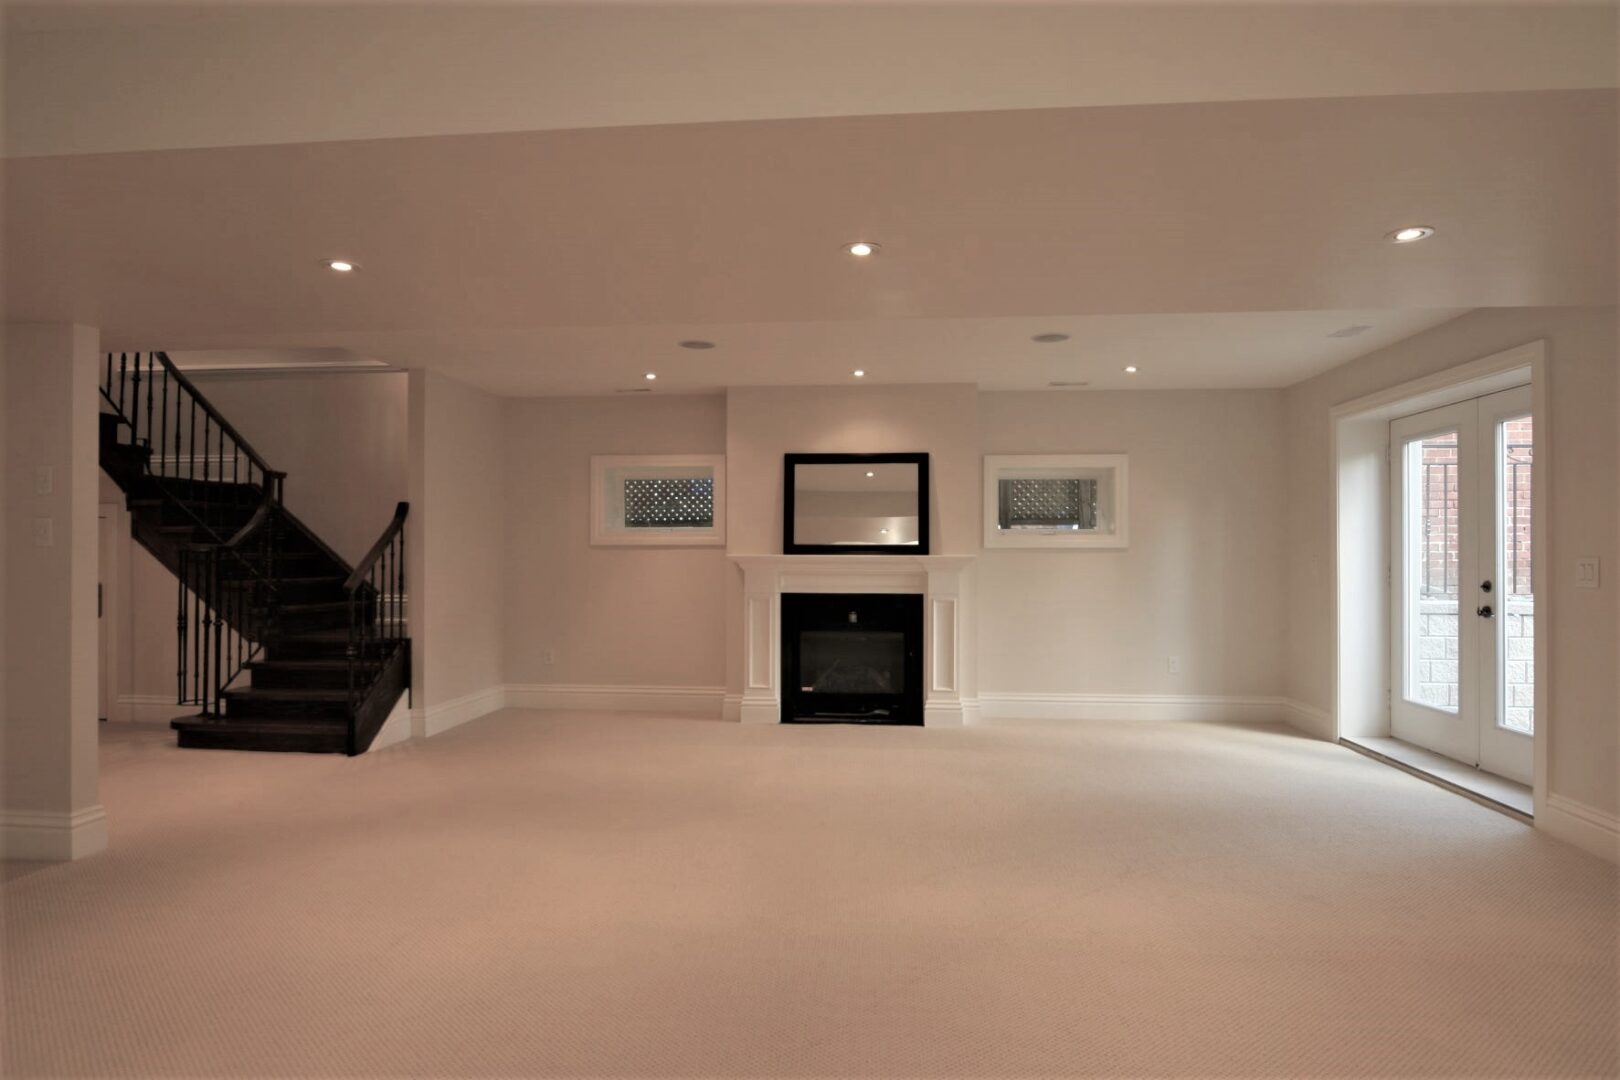 An Empty Room With Dark Staircase and a Fireplace